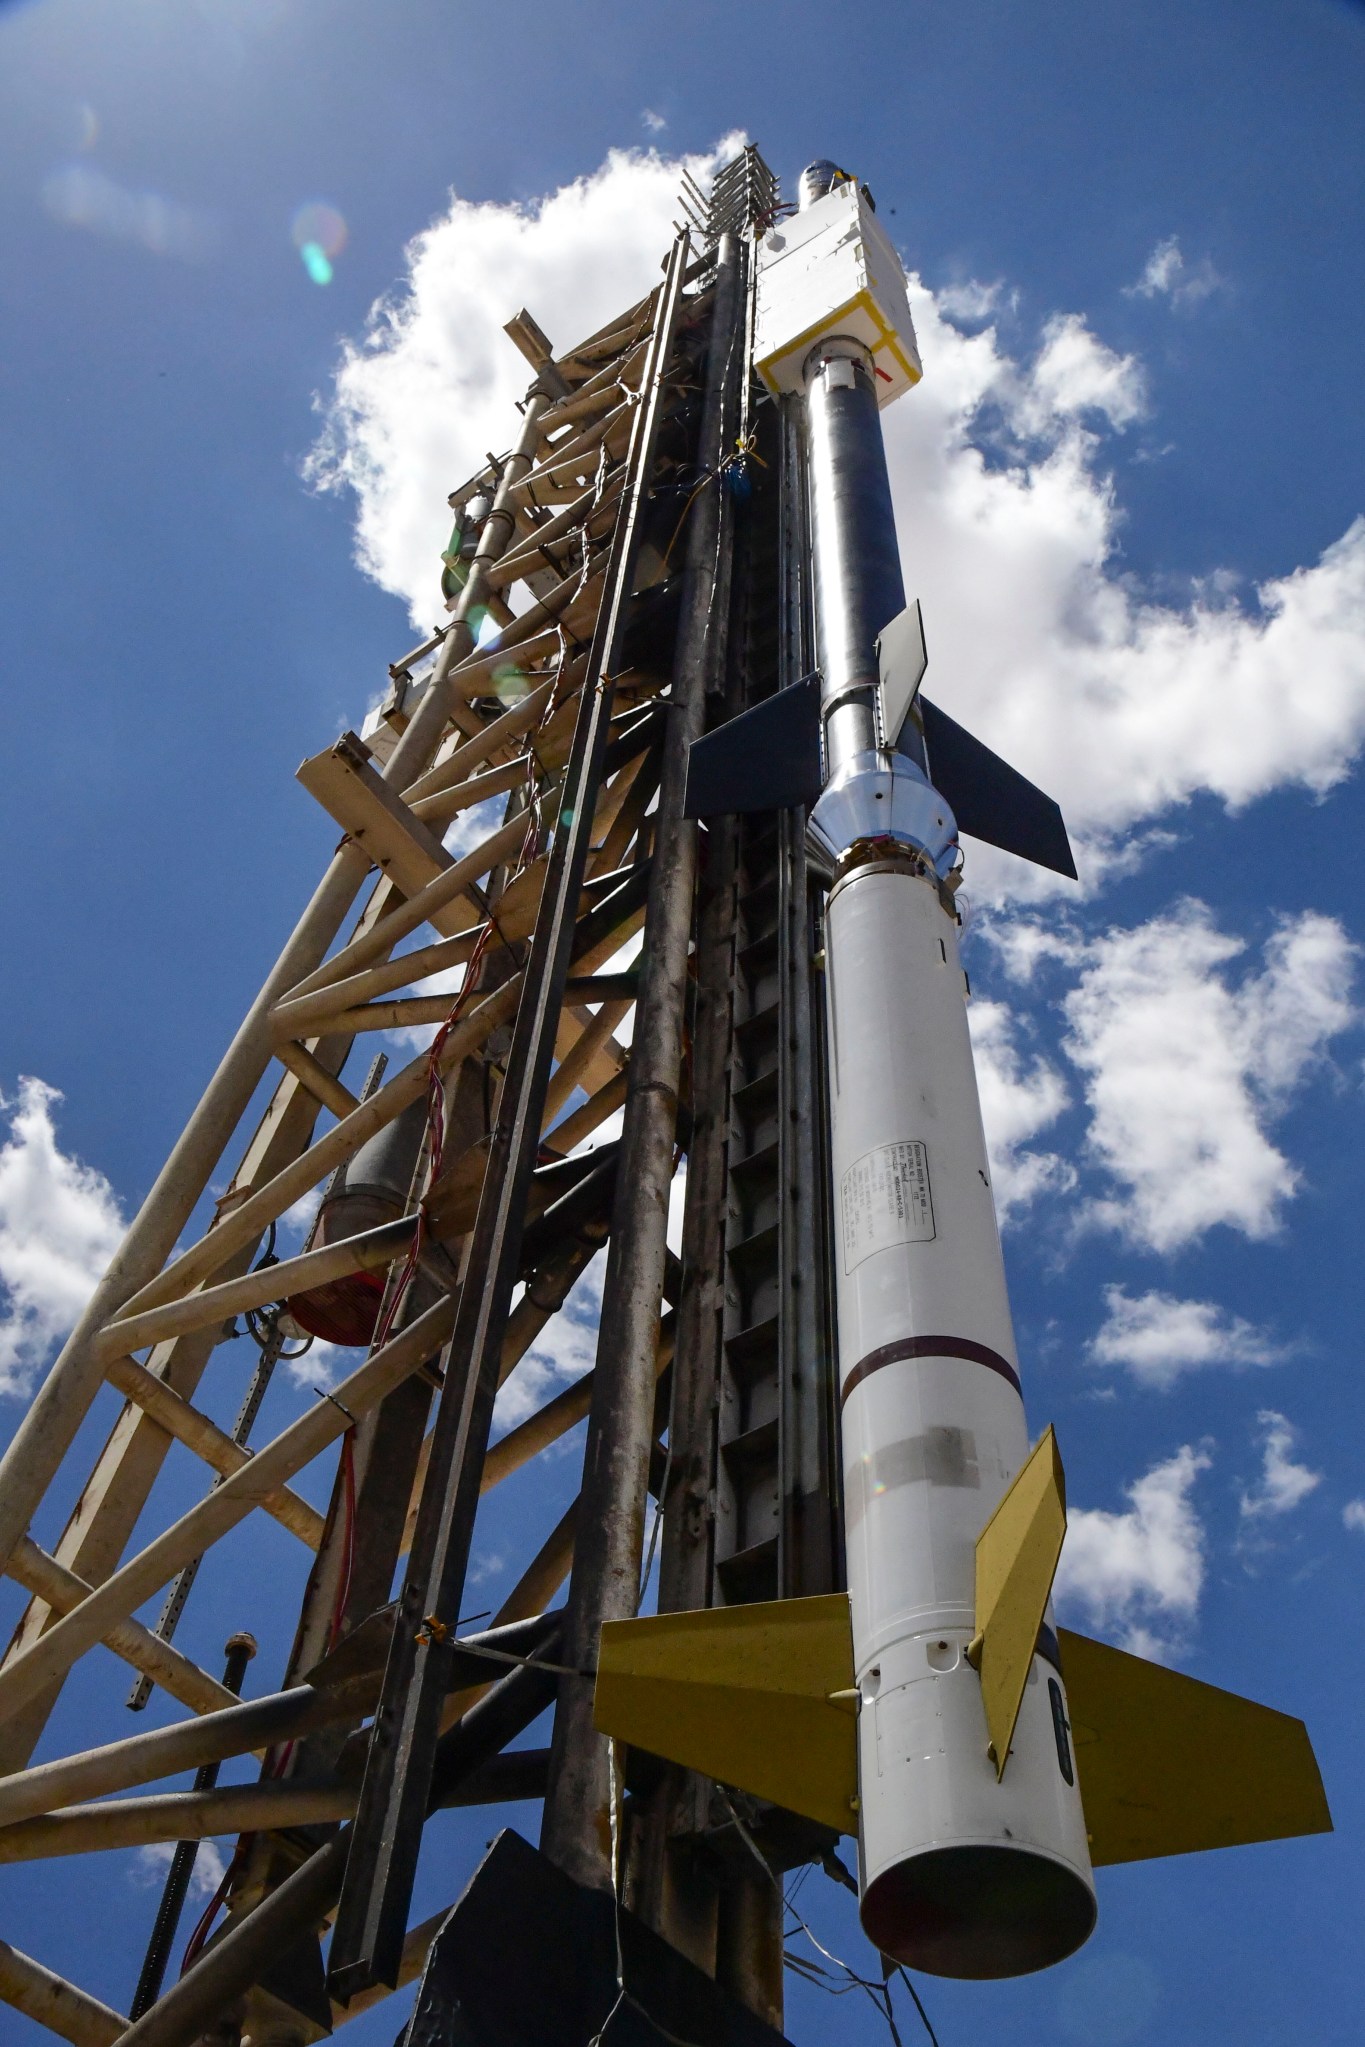 NASA’s MaGIXS sounding rocket mission awaits launch on the pad at White Sands Missile Range in New Mexico.